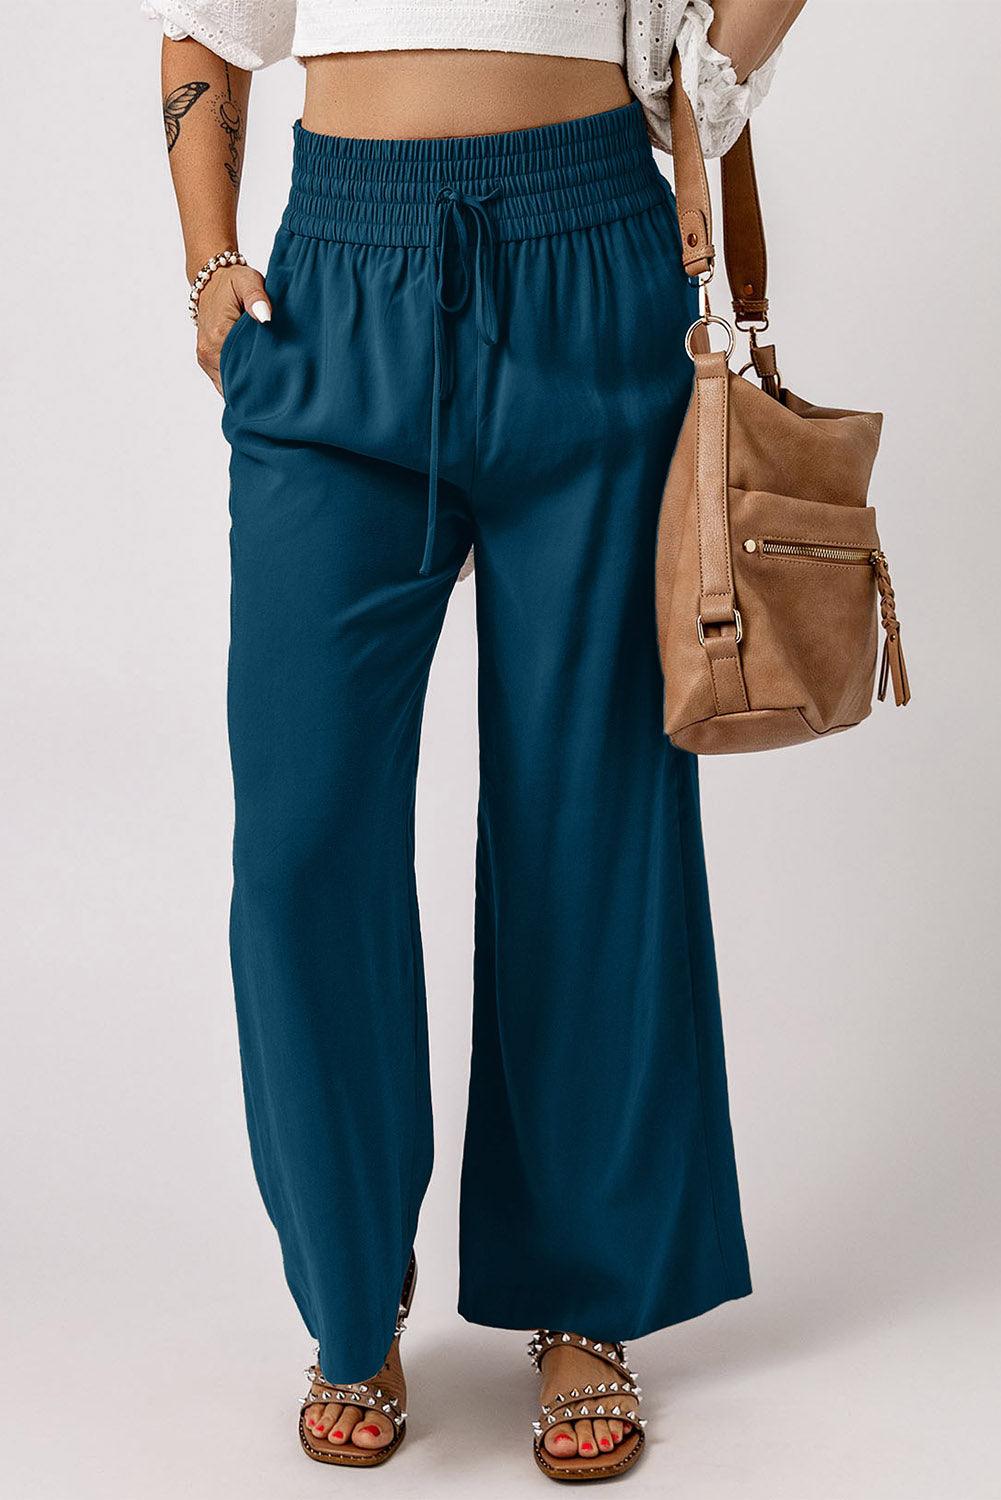 Women Wide Leg Blue Summer Pants with Elastic Waist for Work Casual